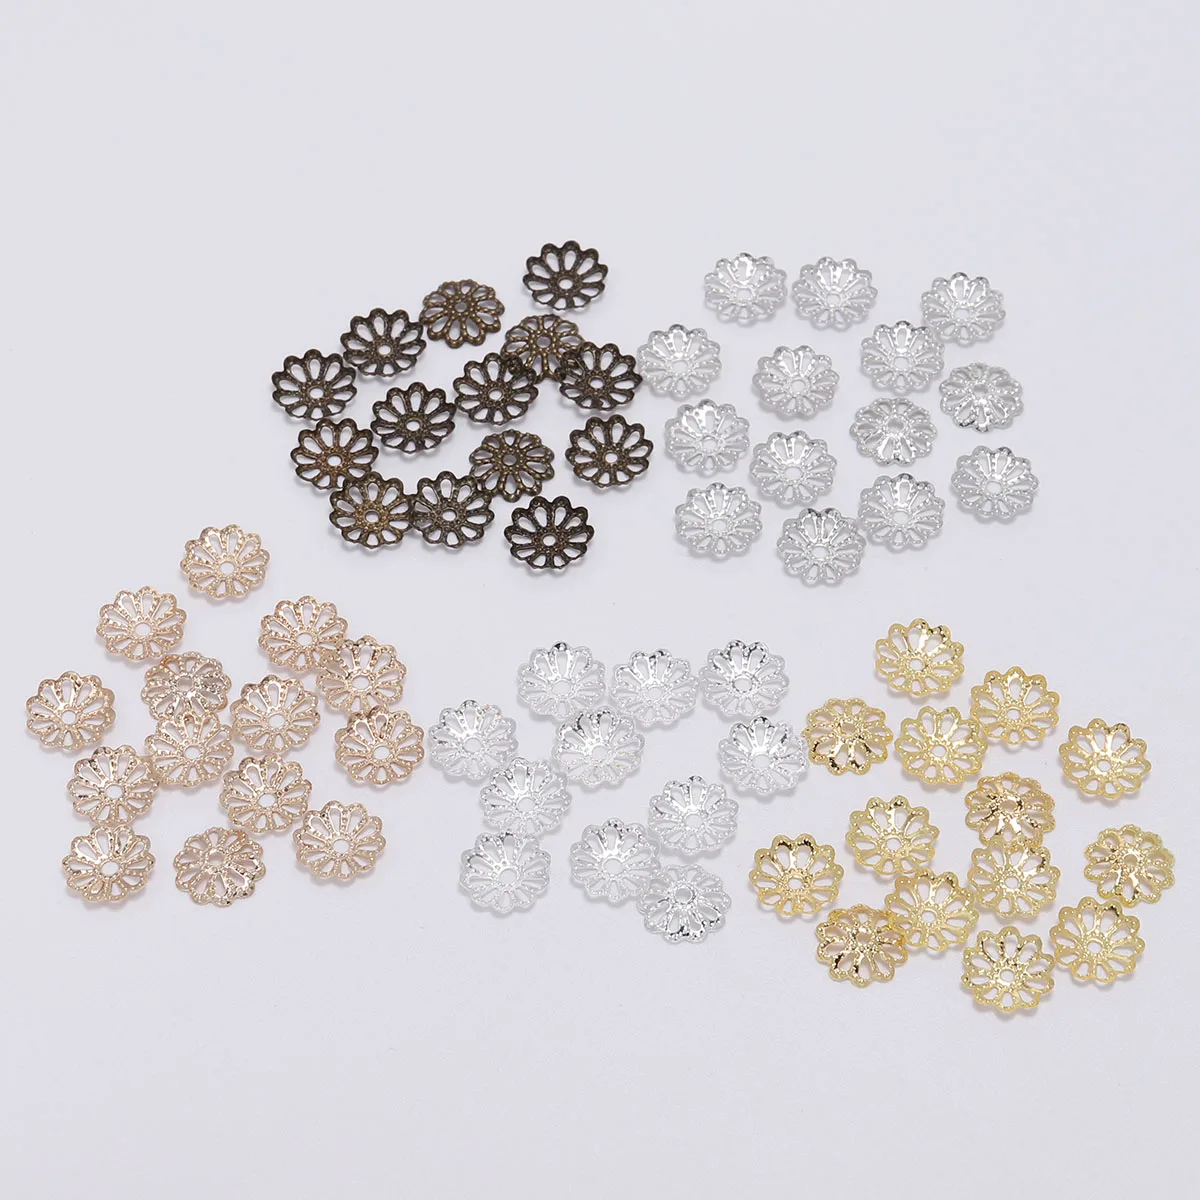 200Pcs/lot 7/9mm Metal Plated Flower Petal Spacer Beads End Caps Charm Bead Cups For Jewelry Making Finding Supplies Accessories